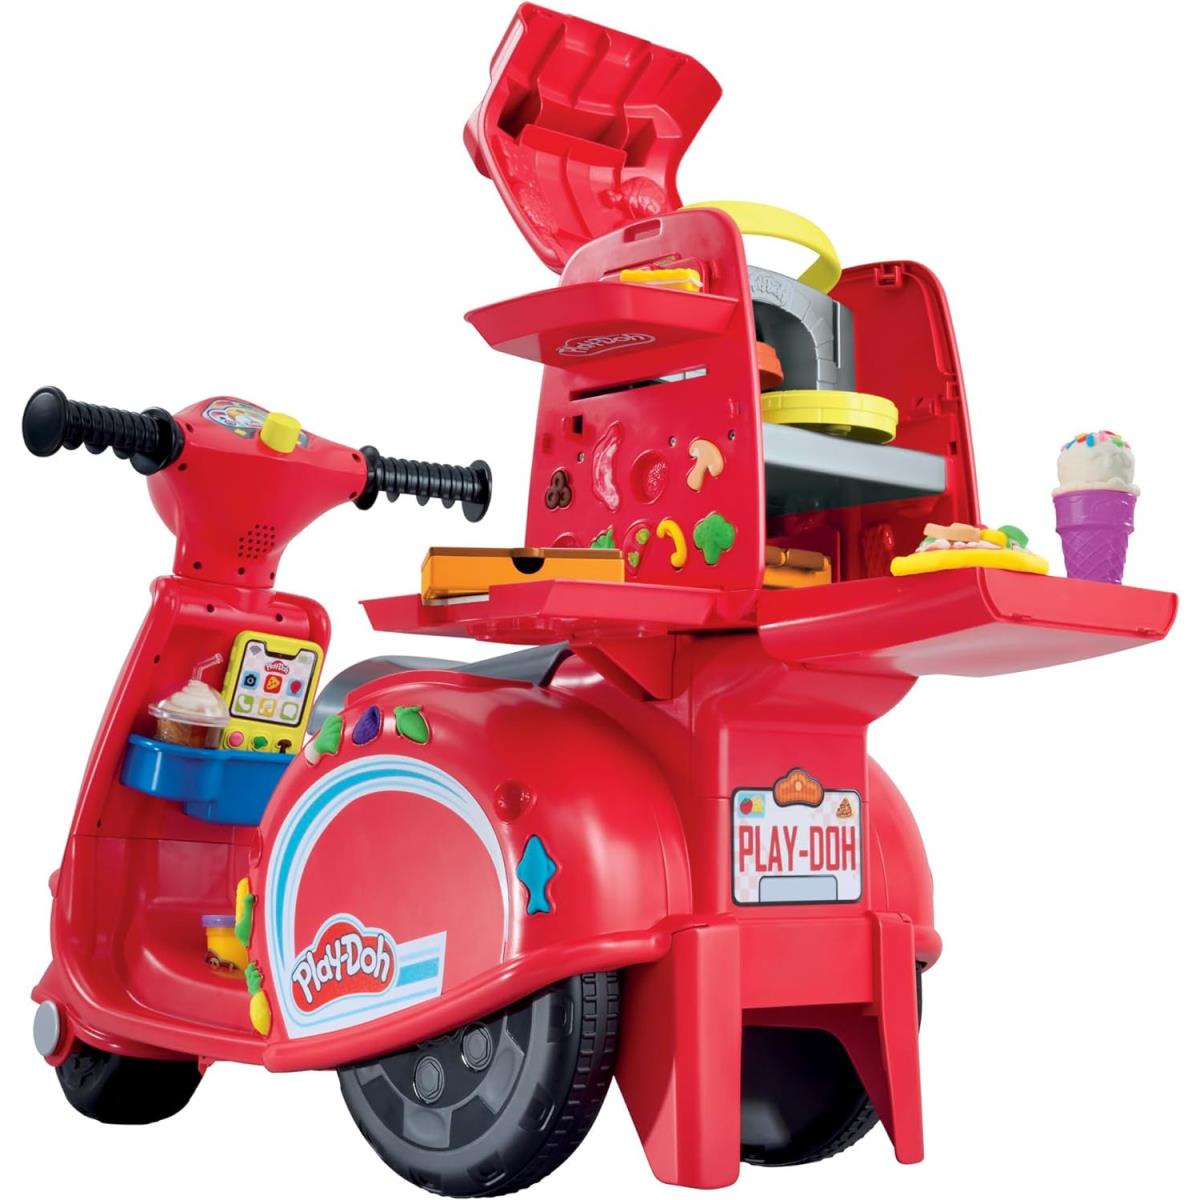 Play-doh Pizza Delivery Ride-on Scooter Playset Kids Arts Crafts Play Food Toy